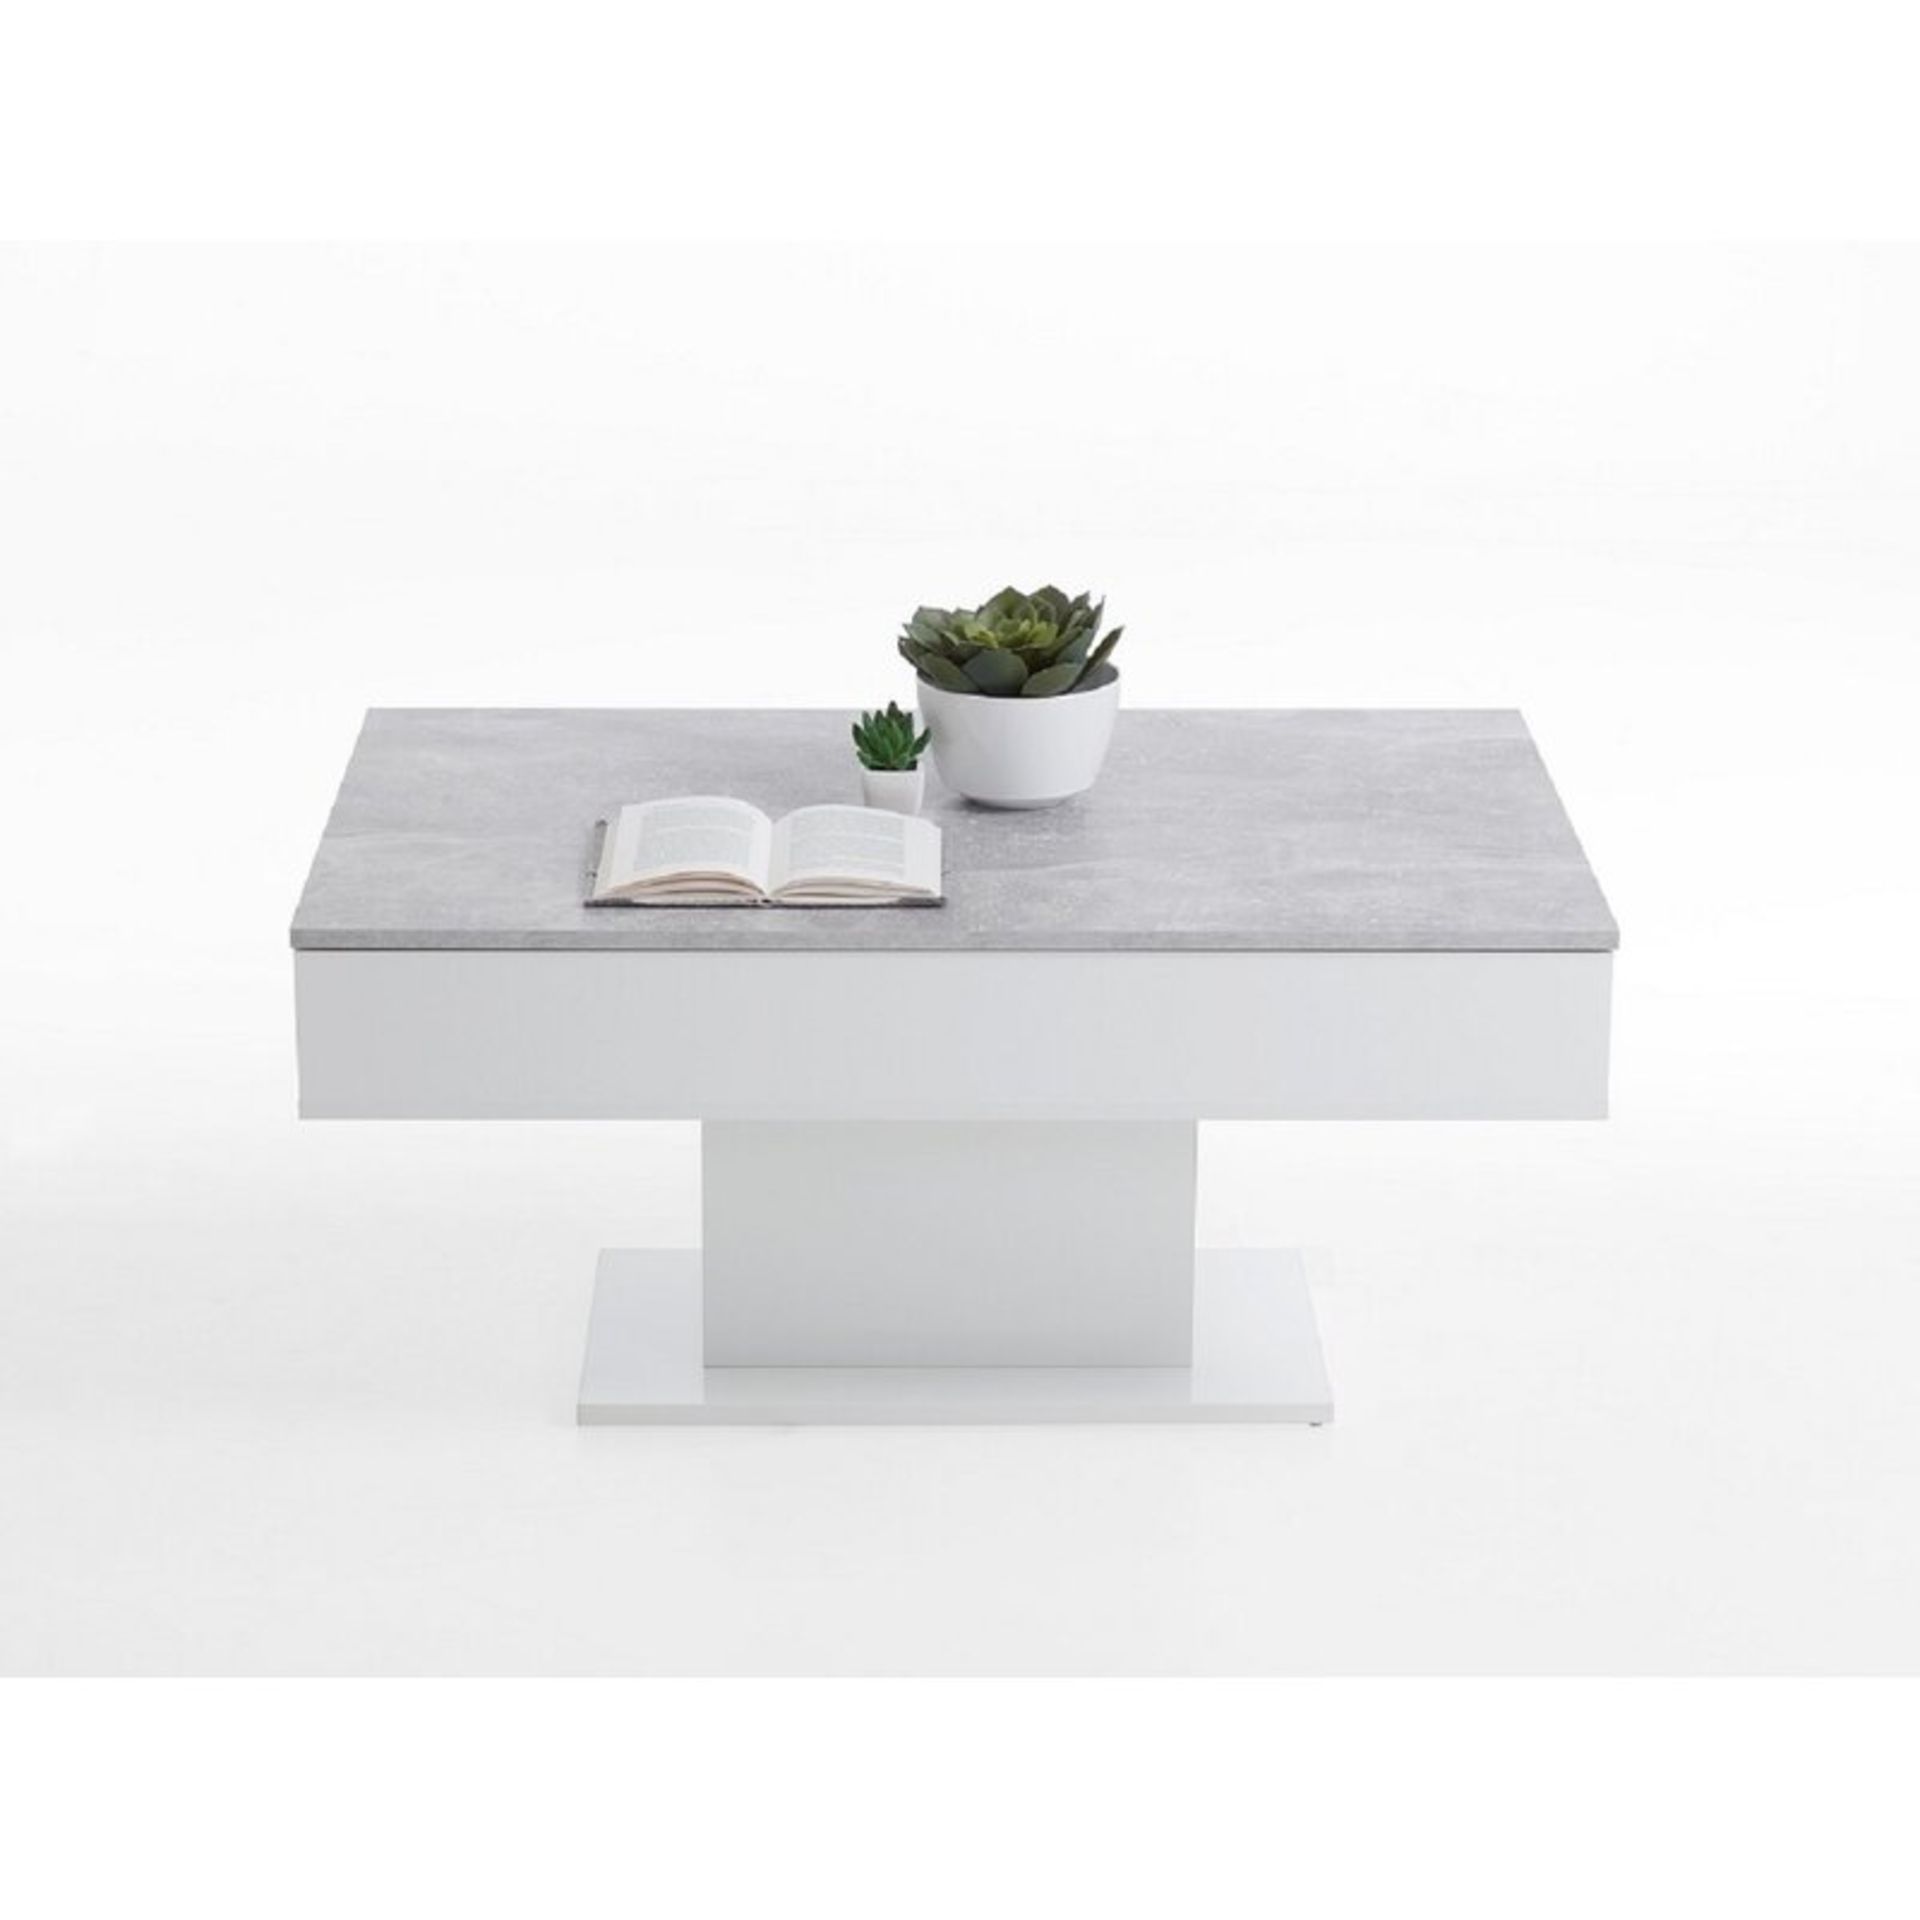 Pedestal Coffee Table with Storage - RRP £207.99.